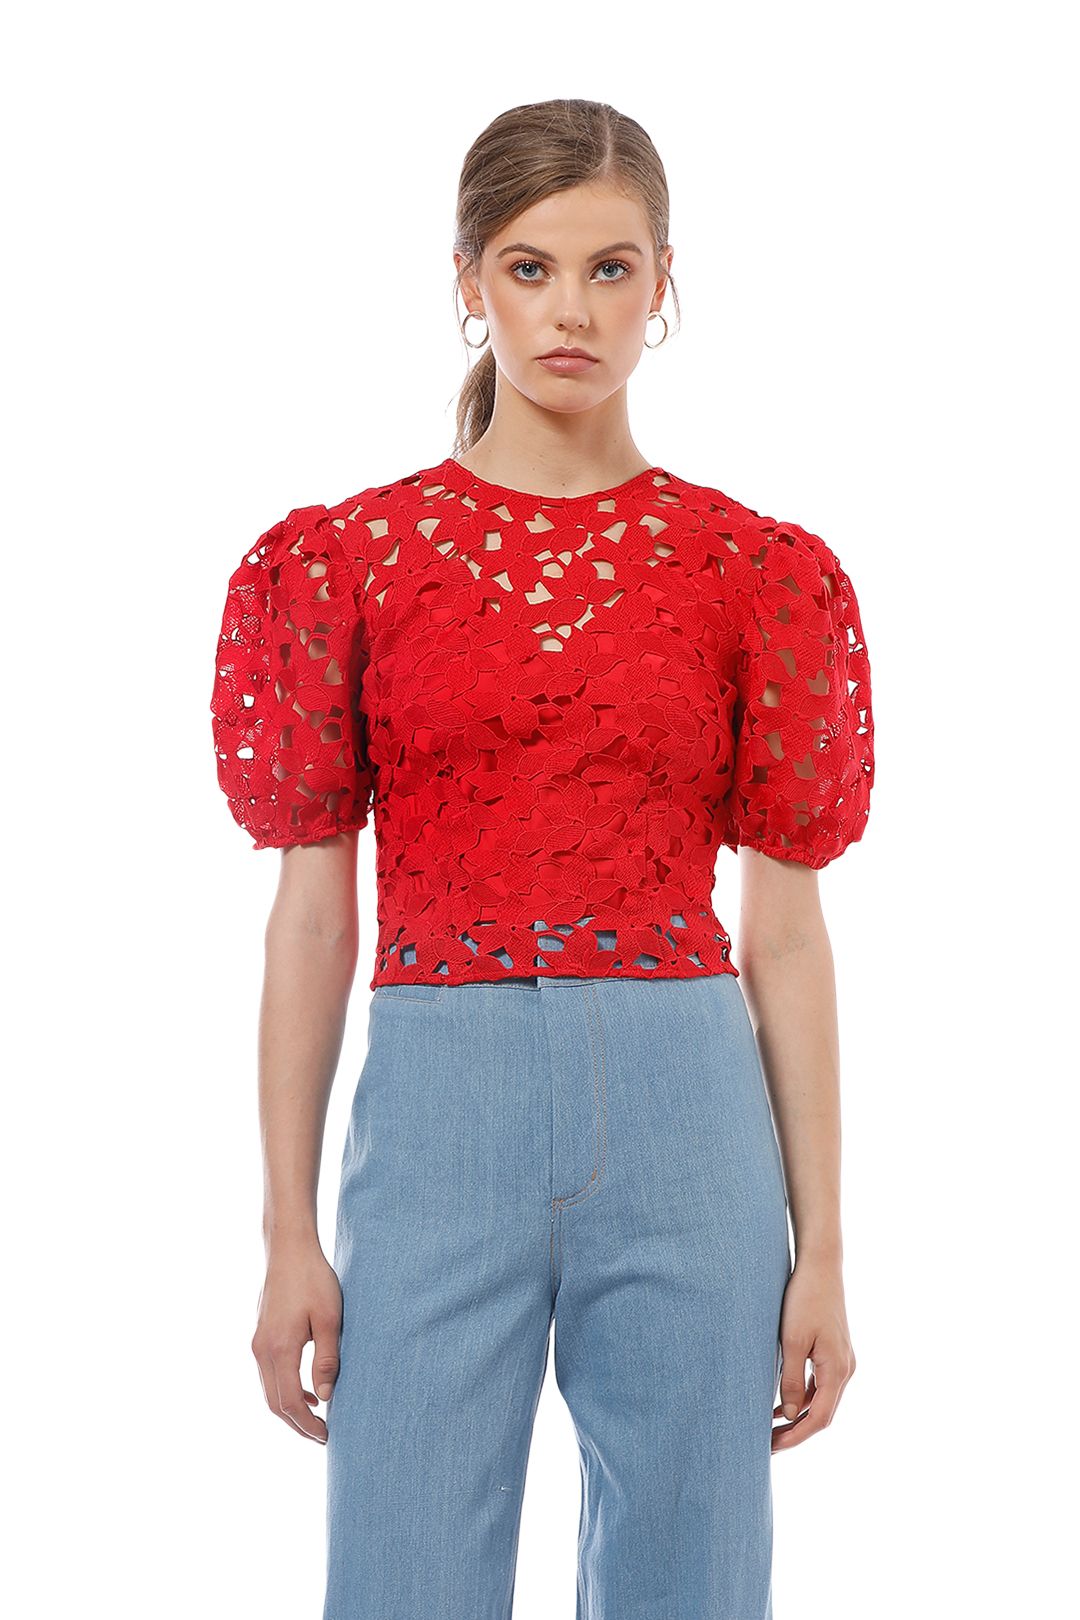 Keepsake the Label - Headlines Lace Top - Red - Close Up